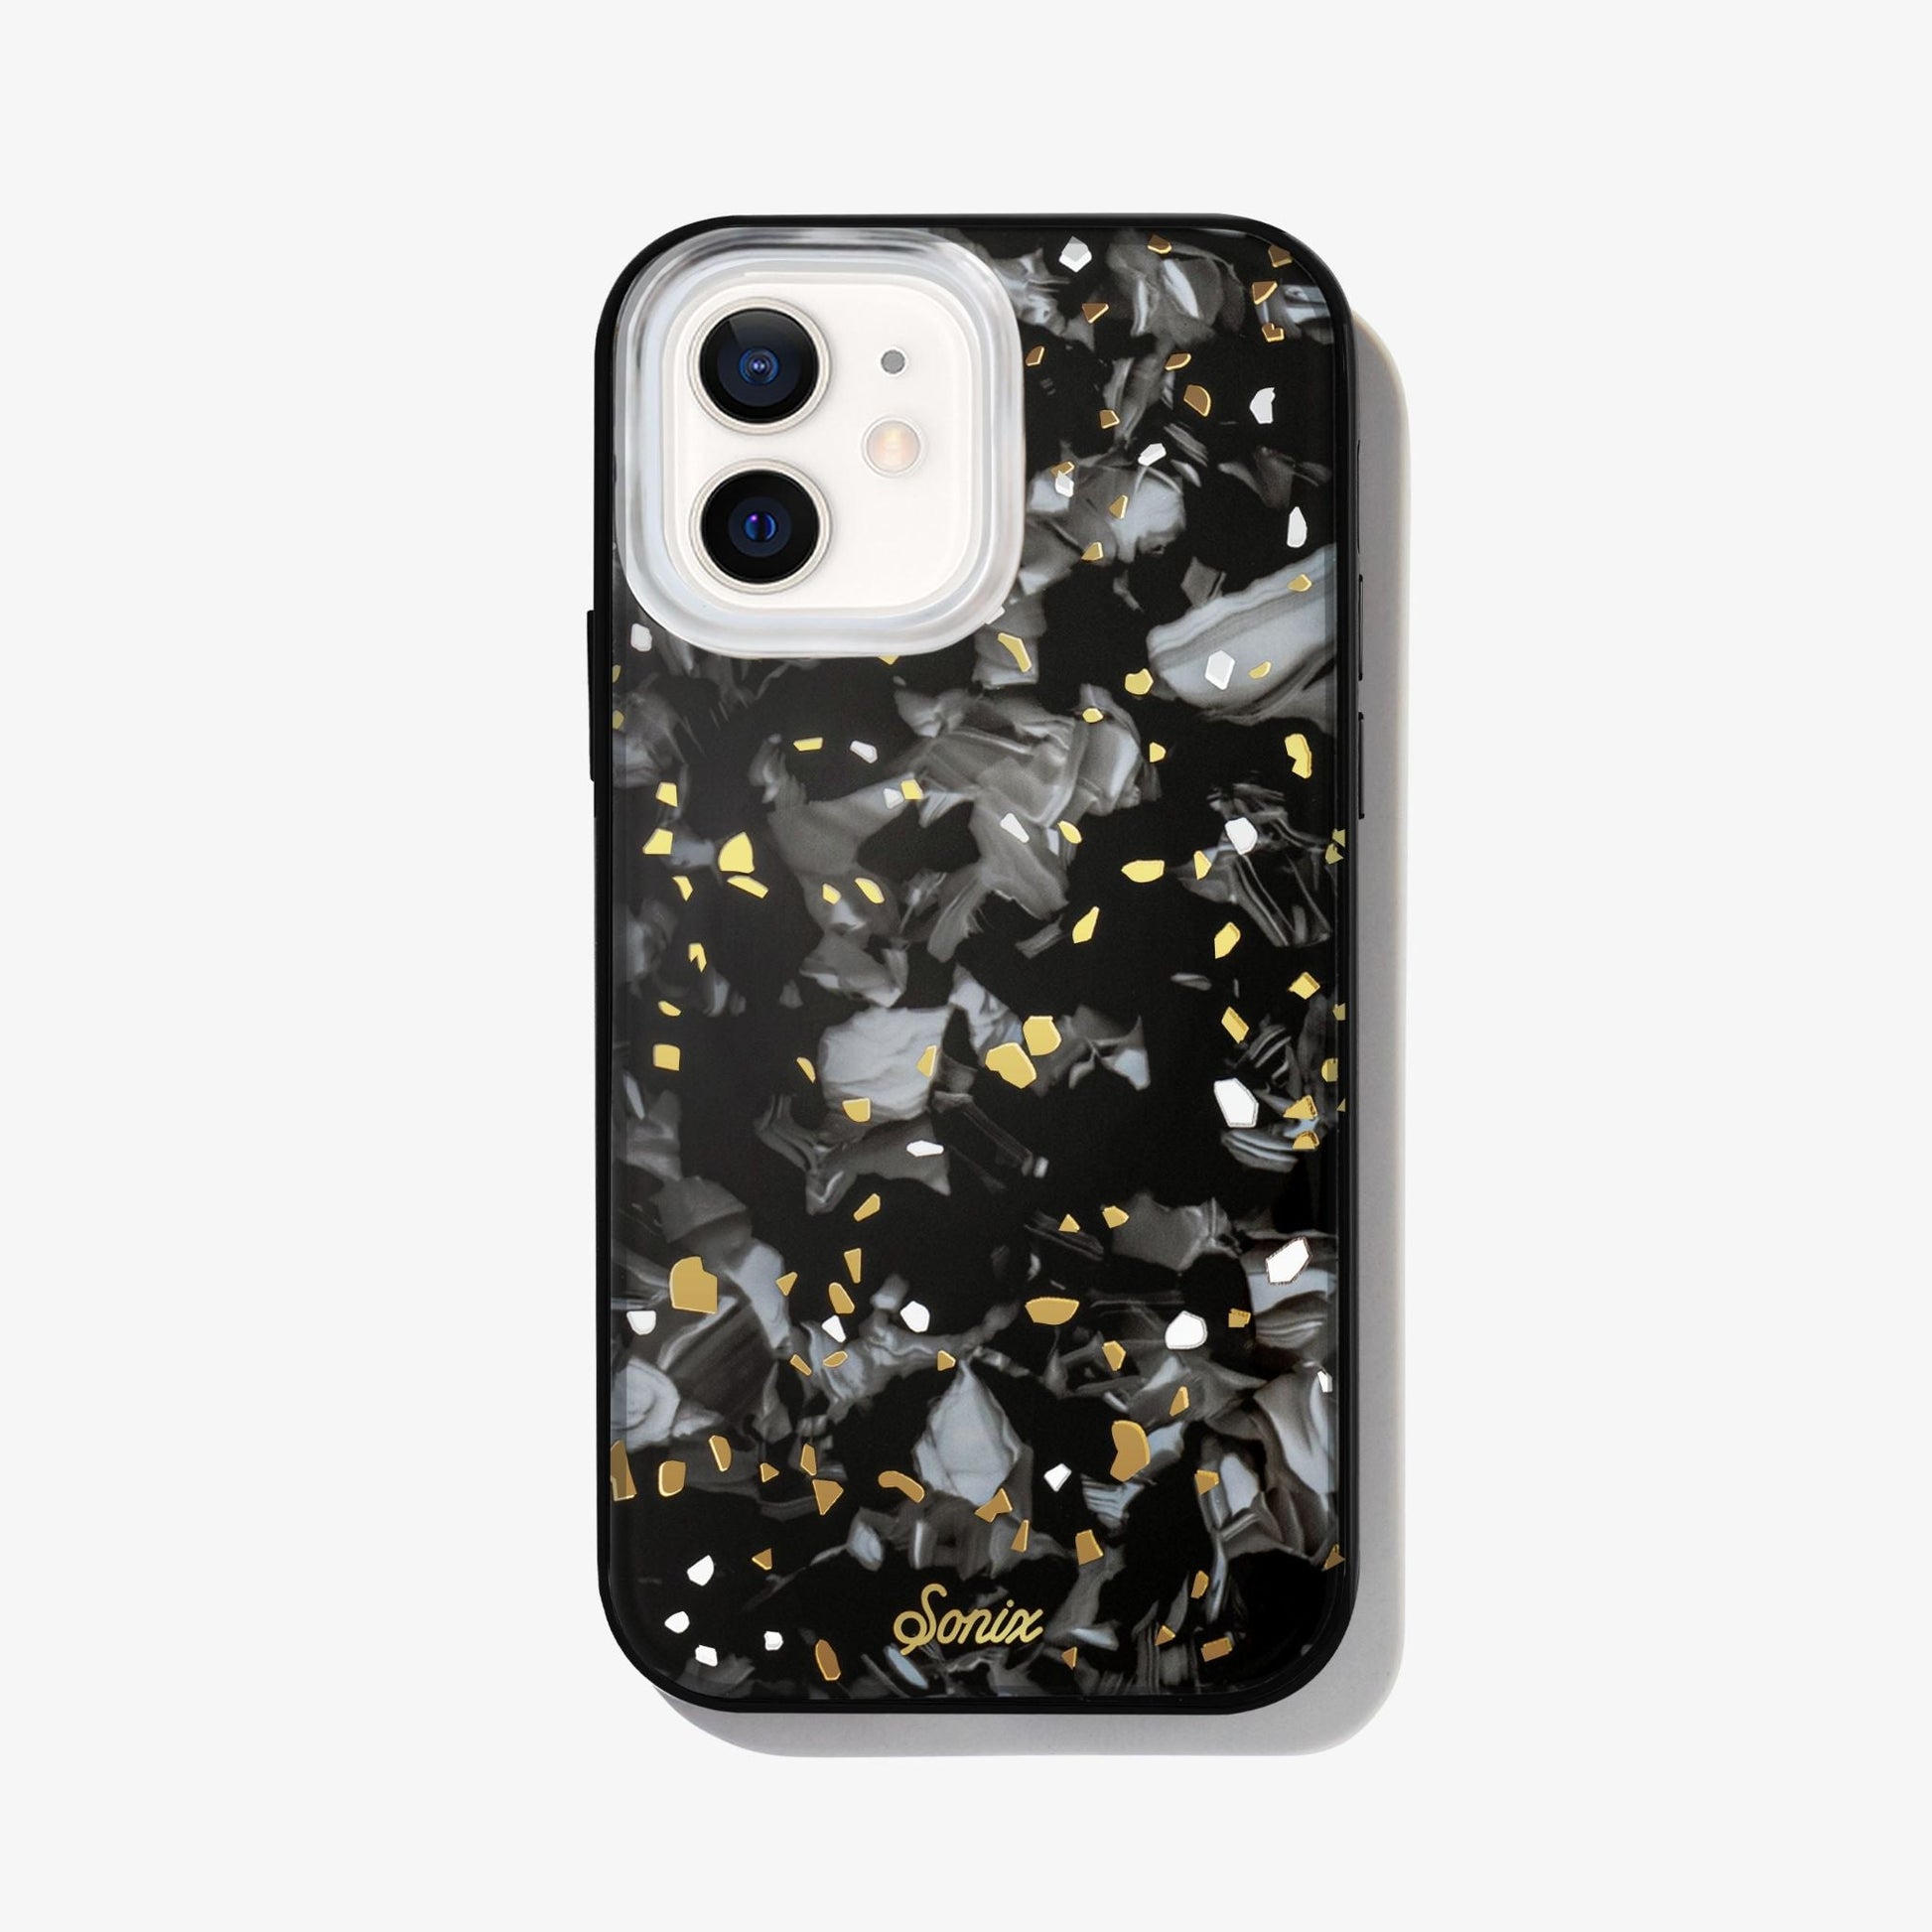 Dark galaxy rocks with highlights of gold and white on a black base.case shown on an iphone 12